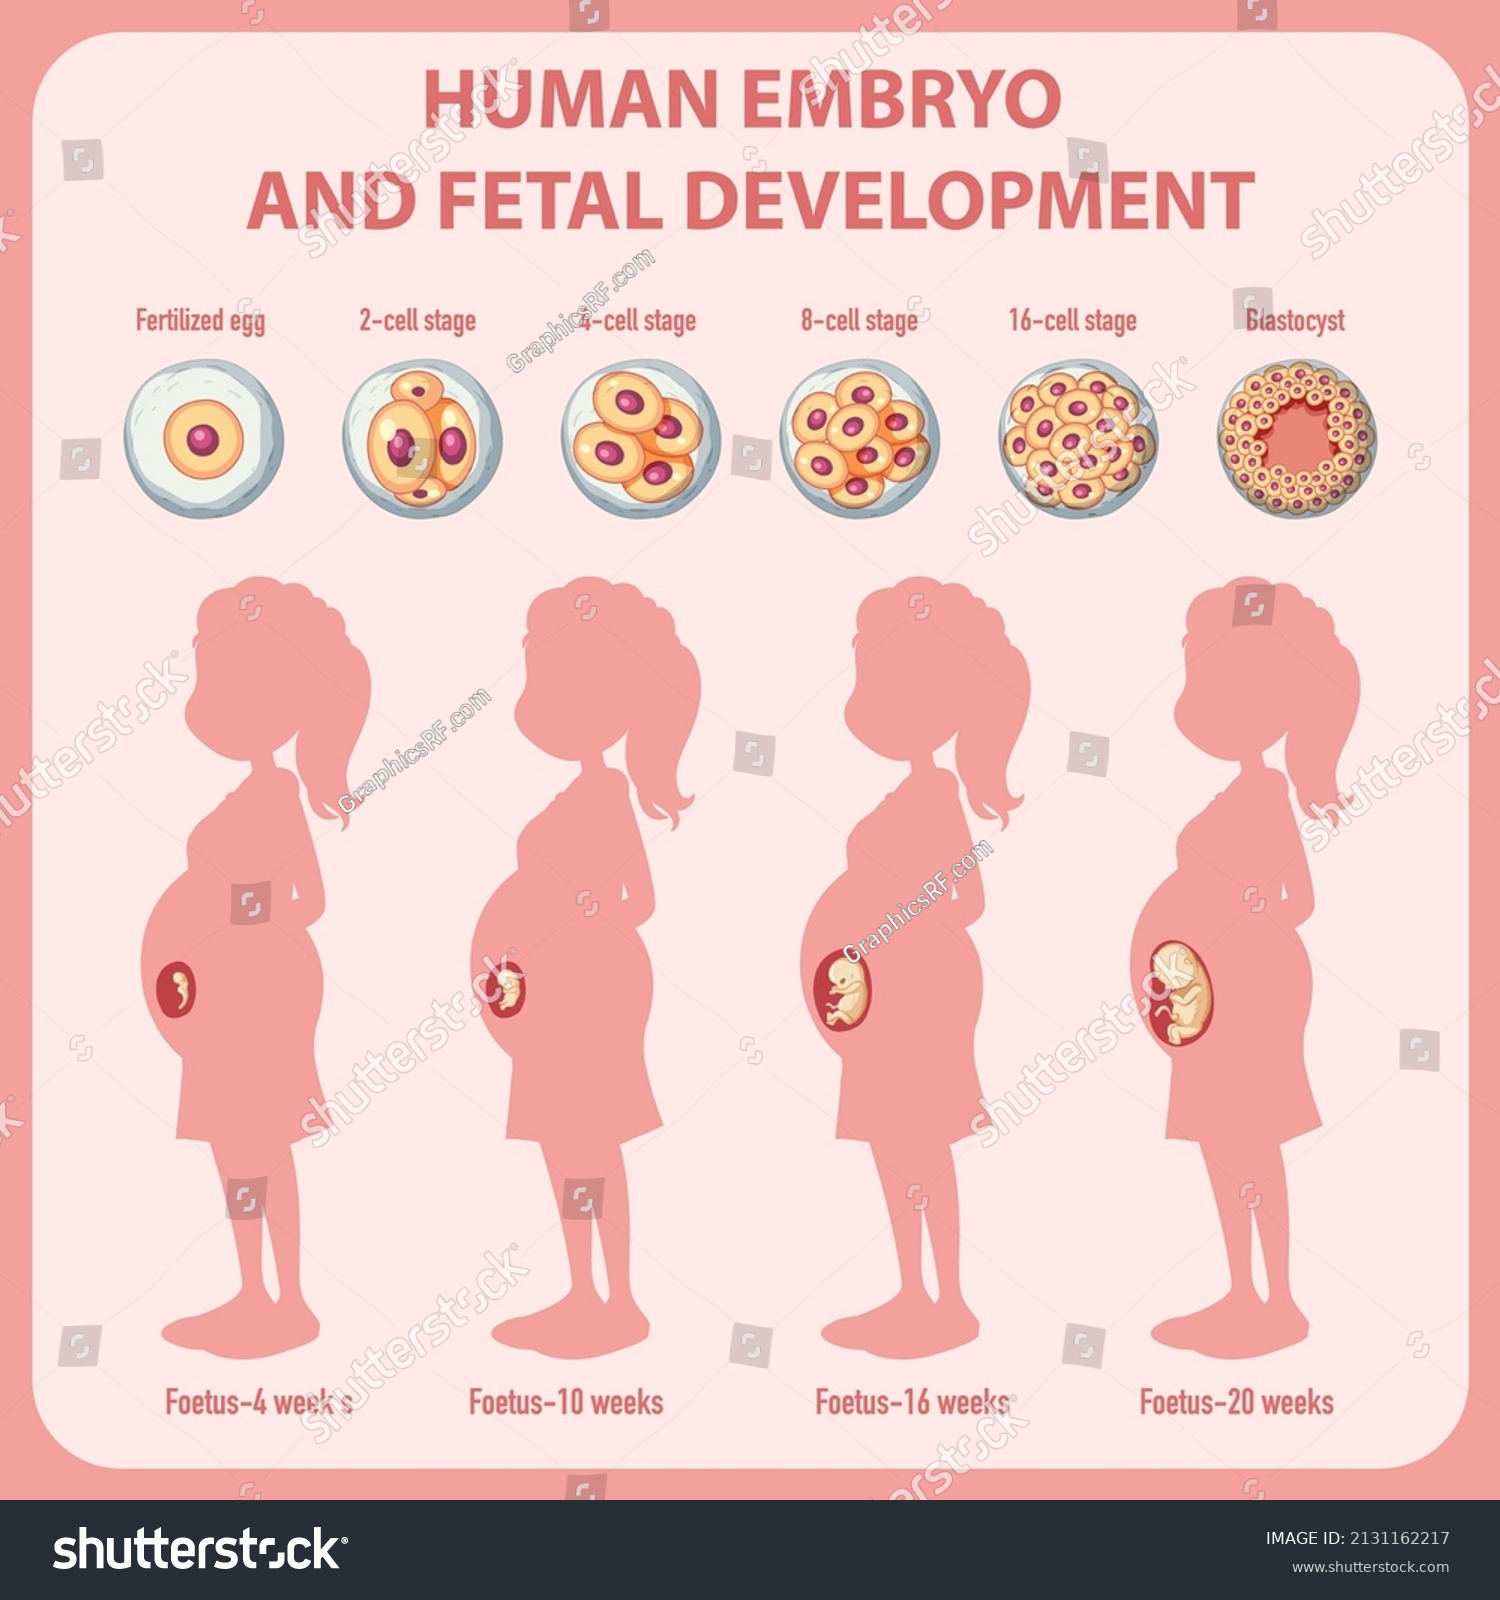 Human Embryonic Development Human Infographic Illustration Stock Vector Royalty Free 